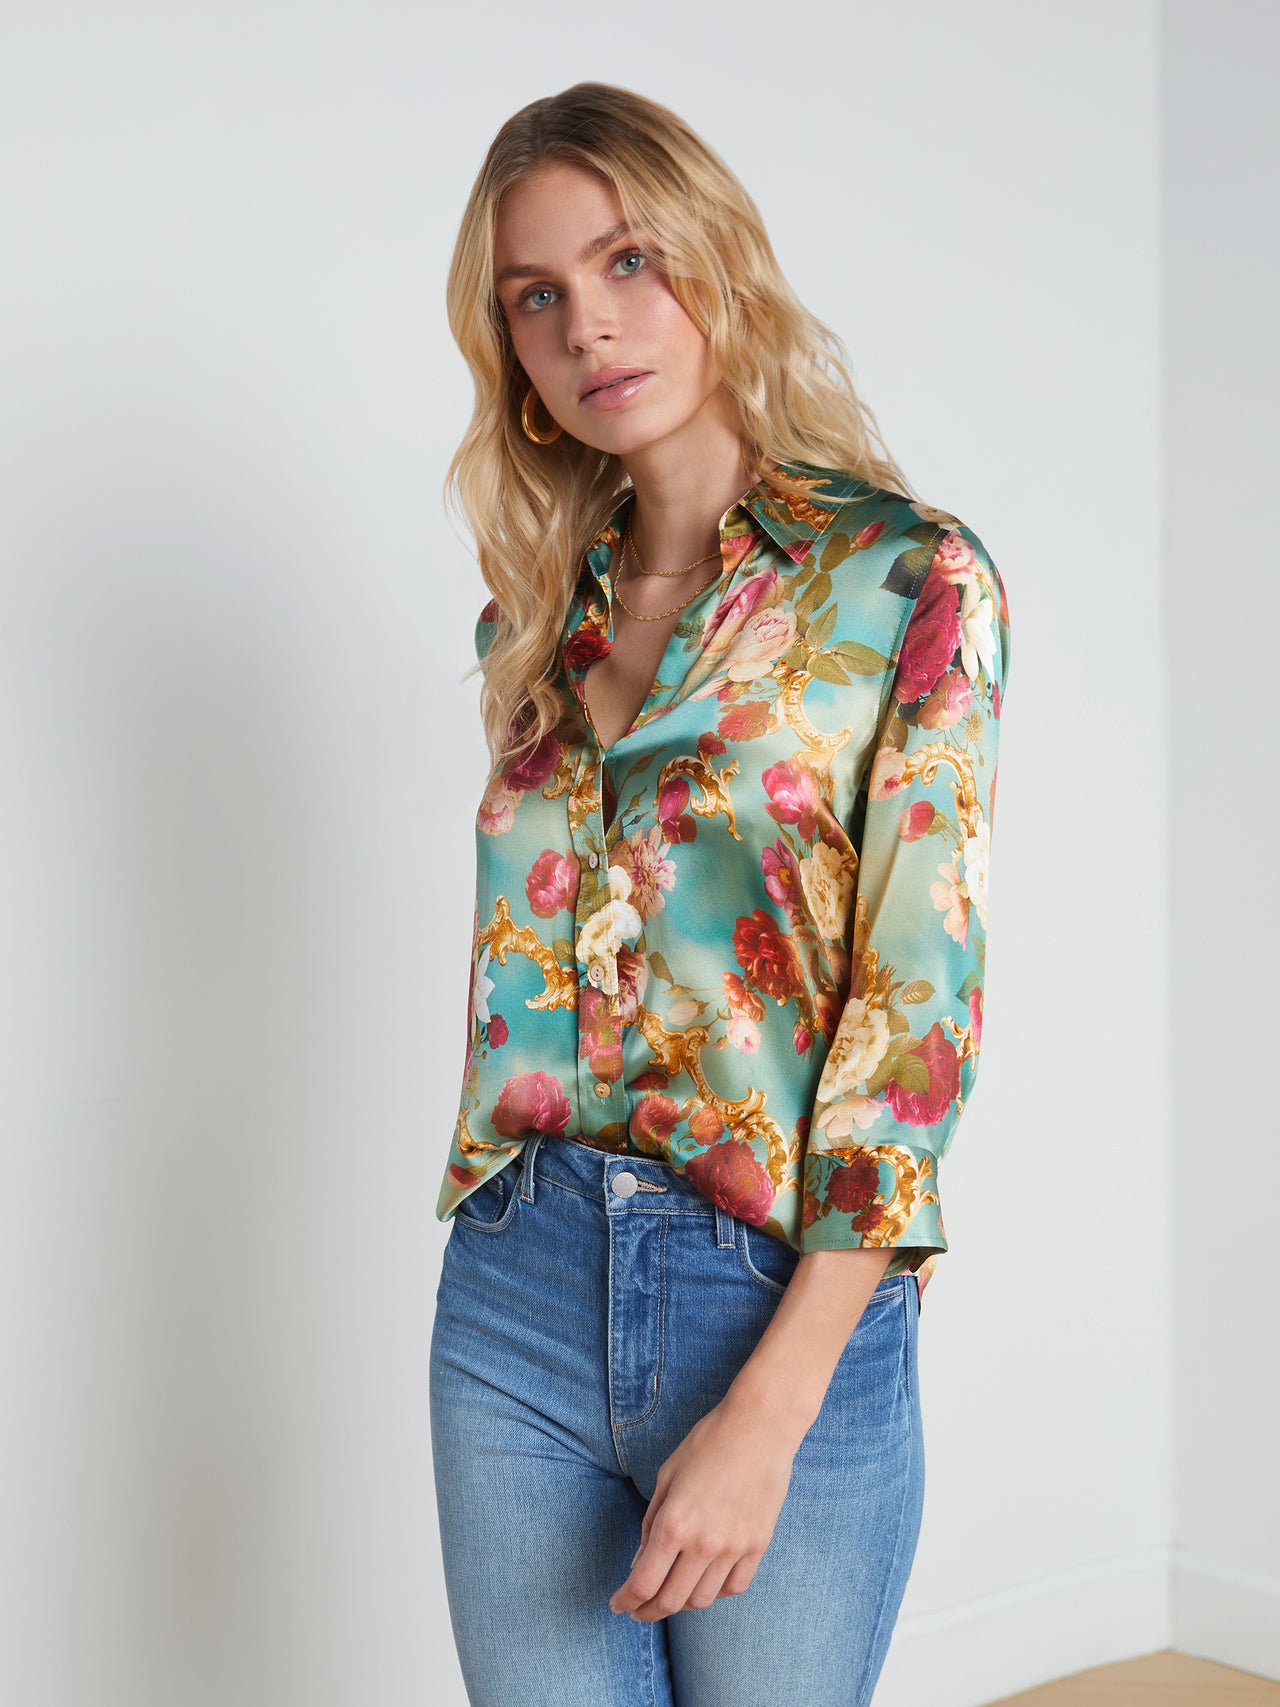 Patterned Clothing - Blouses, Tops & Dresses | L'AGENCE